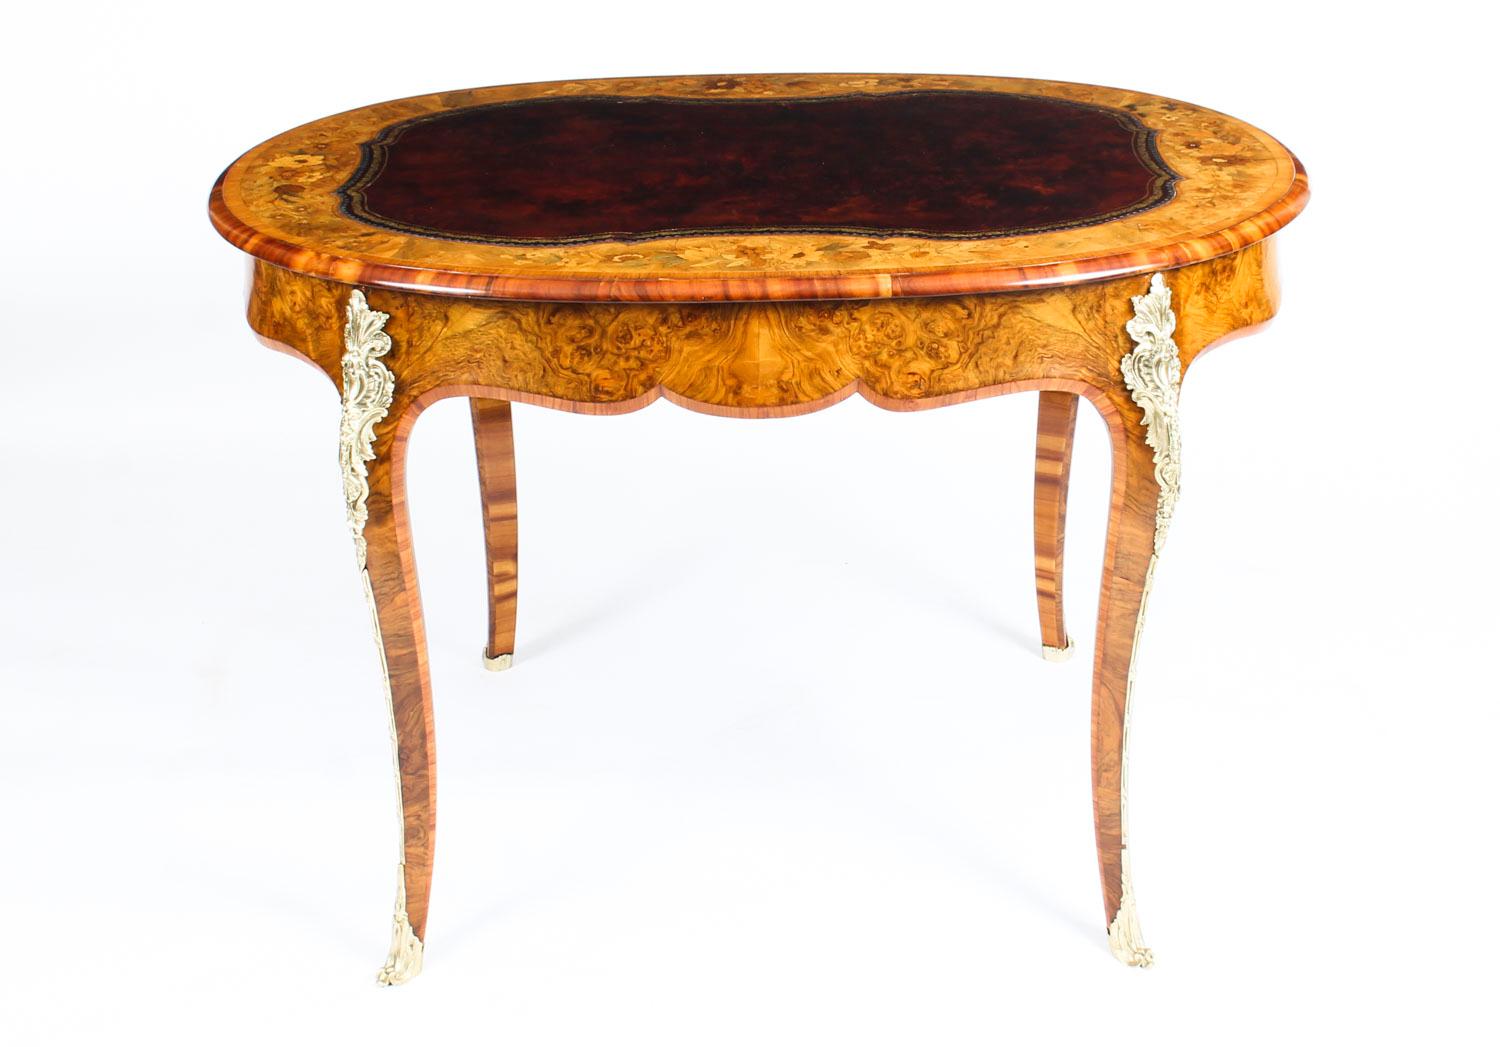 A stupendous antique Victorian burr walnut, floral marquetry and ormolu mounted writing table, circa 1860 in date.

This stunning desk is crafted from beautiful burr walnut with an inset gold tooled burgundy leather that has a wonderful band of